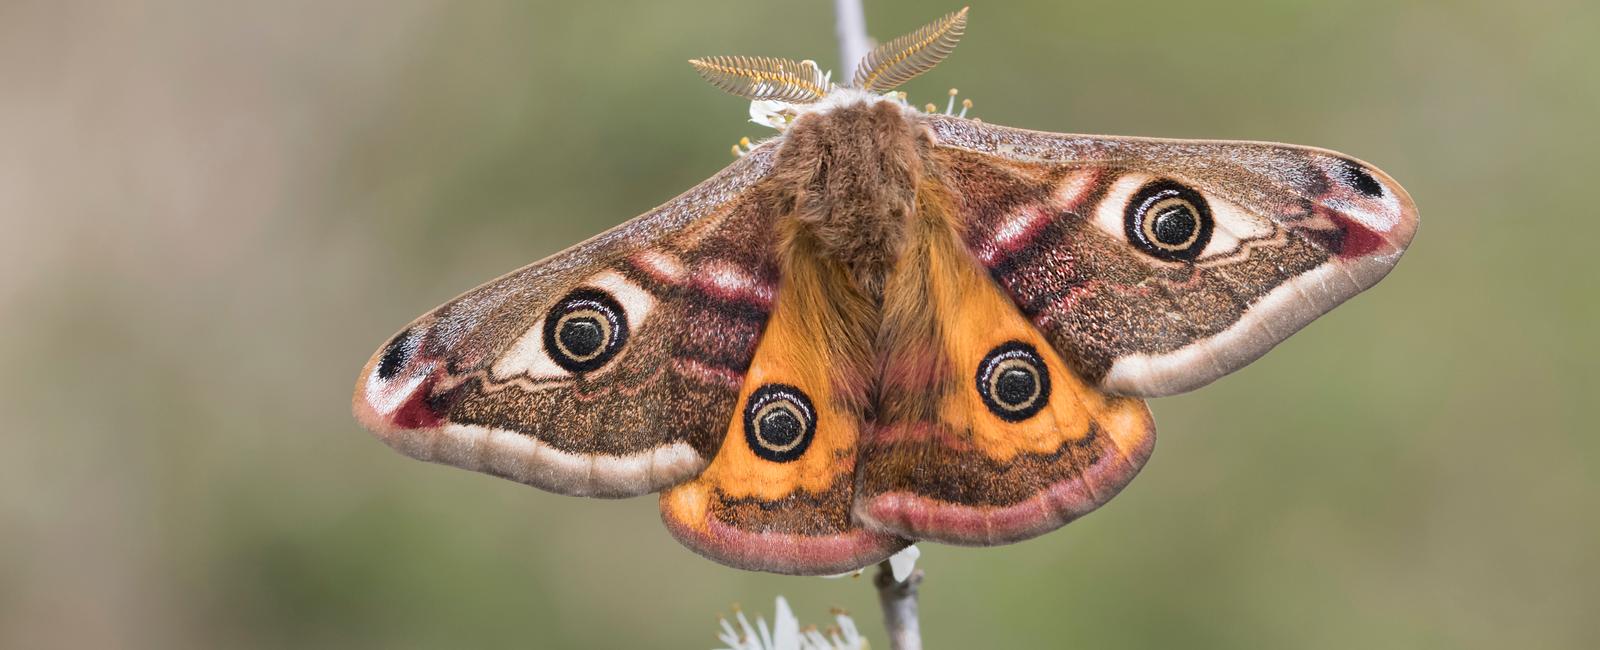 A male emperor moth can smell a female emperor moth up to 7 miles away